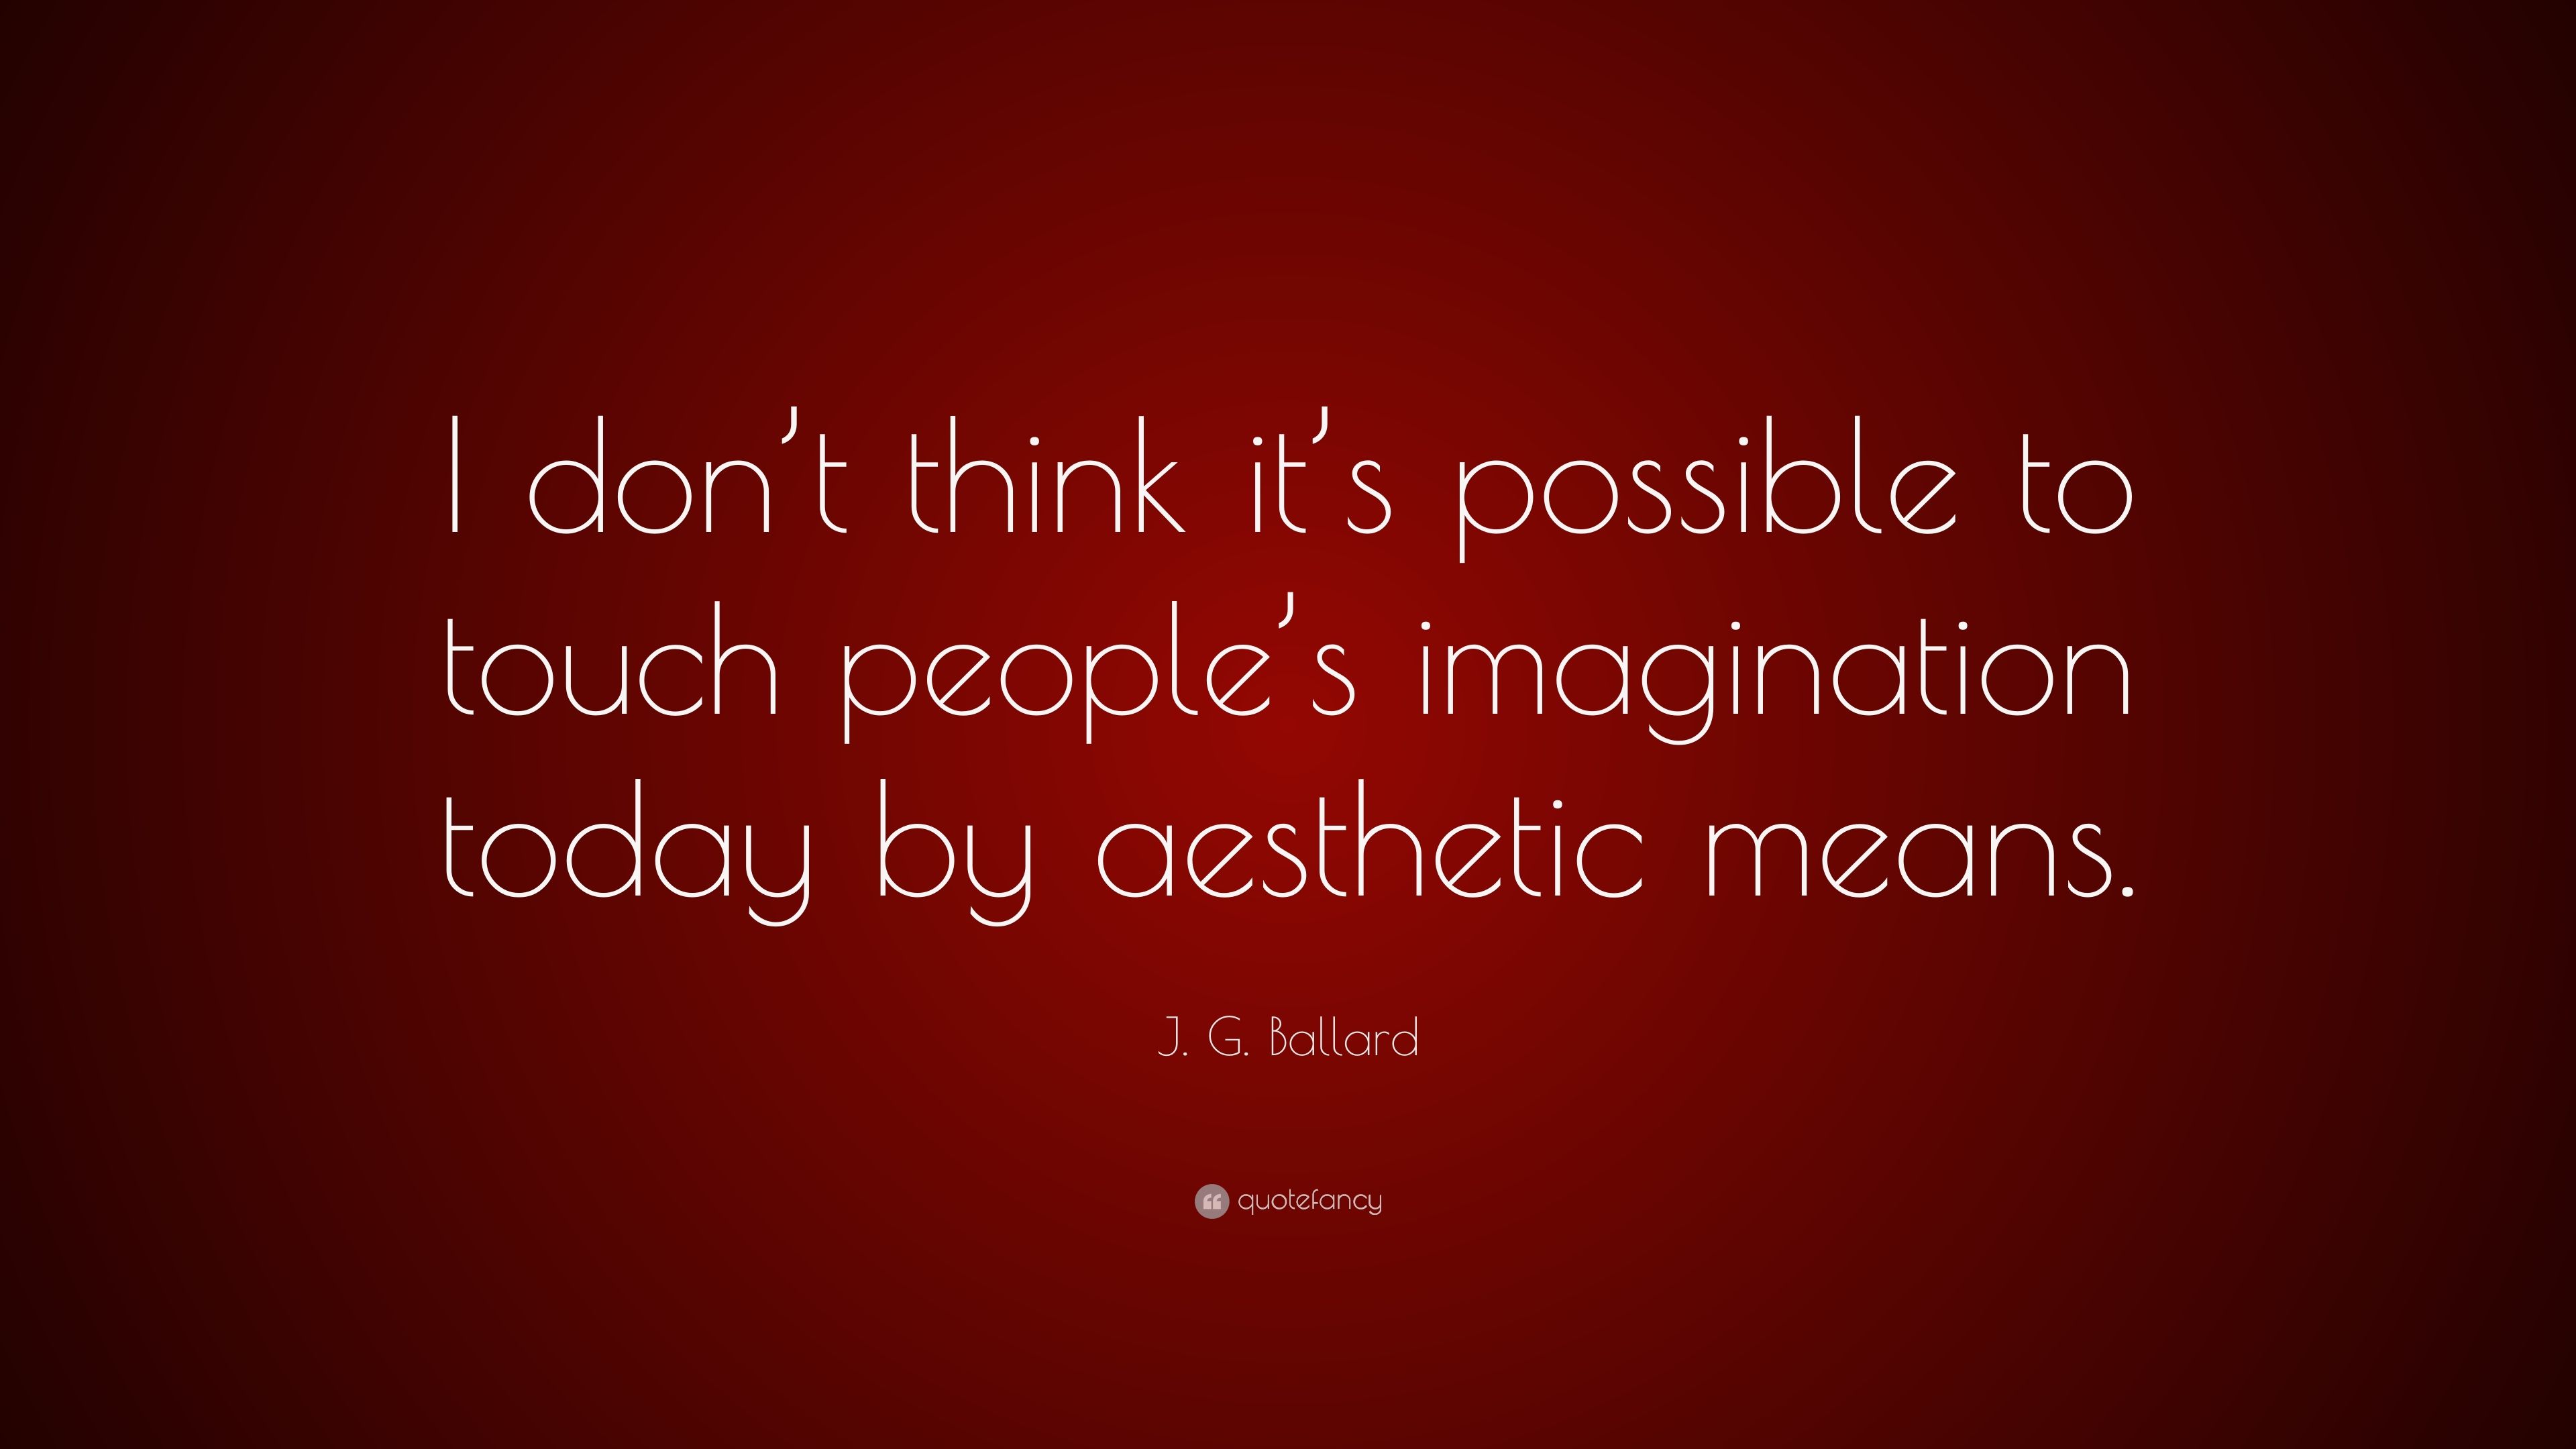 J. G. Ballard Quote: “I don't think it's possible to touch